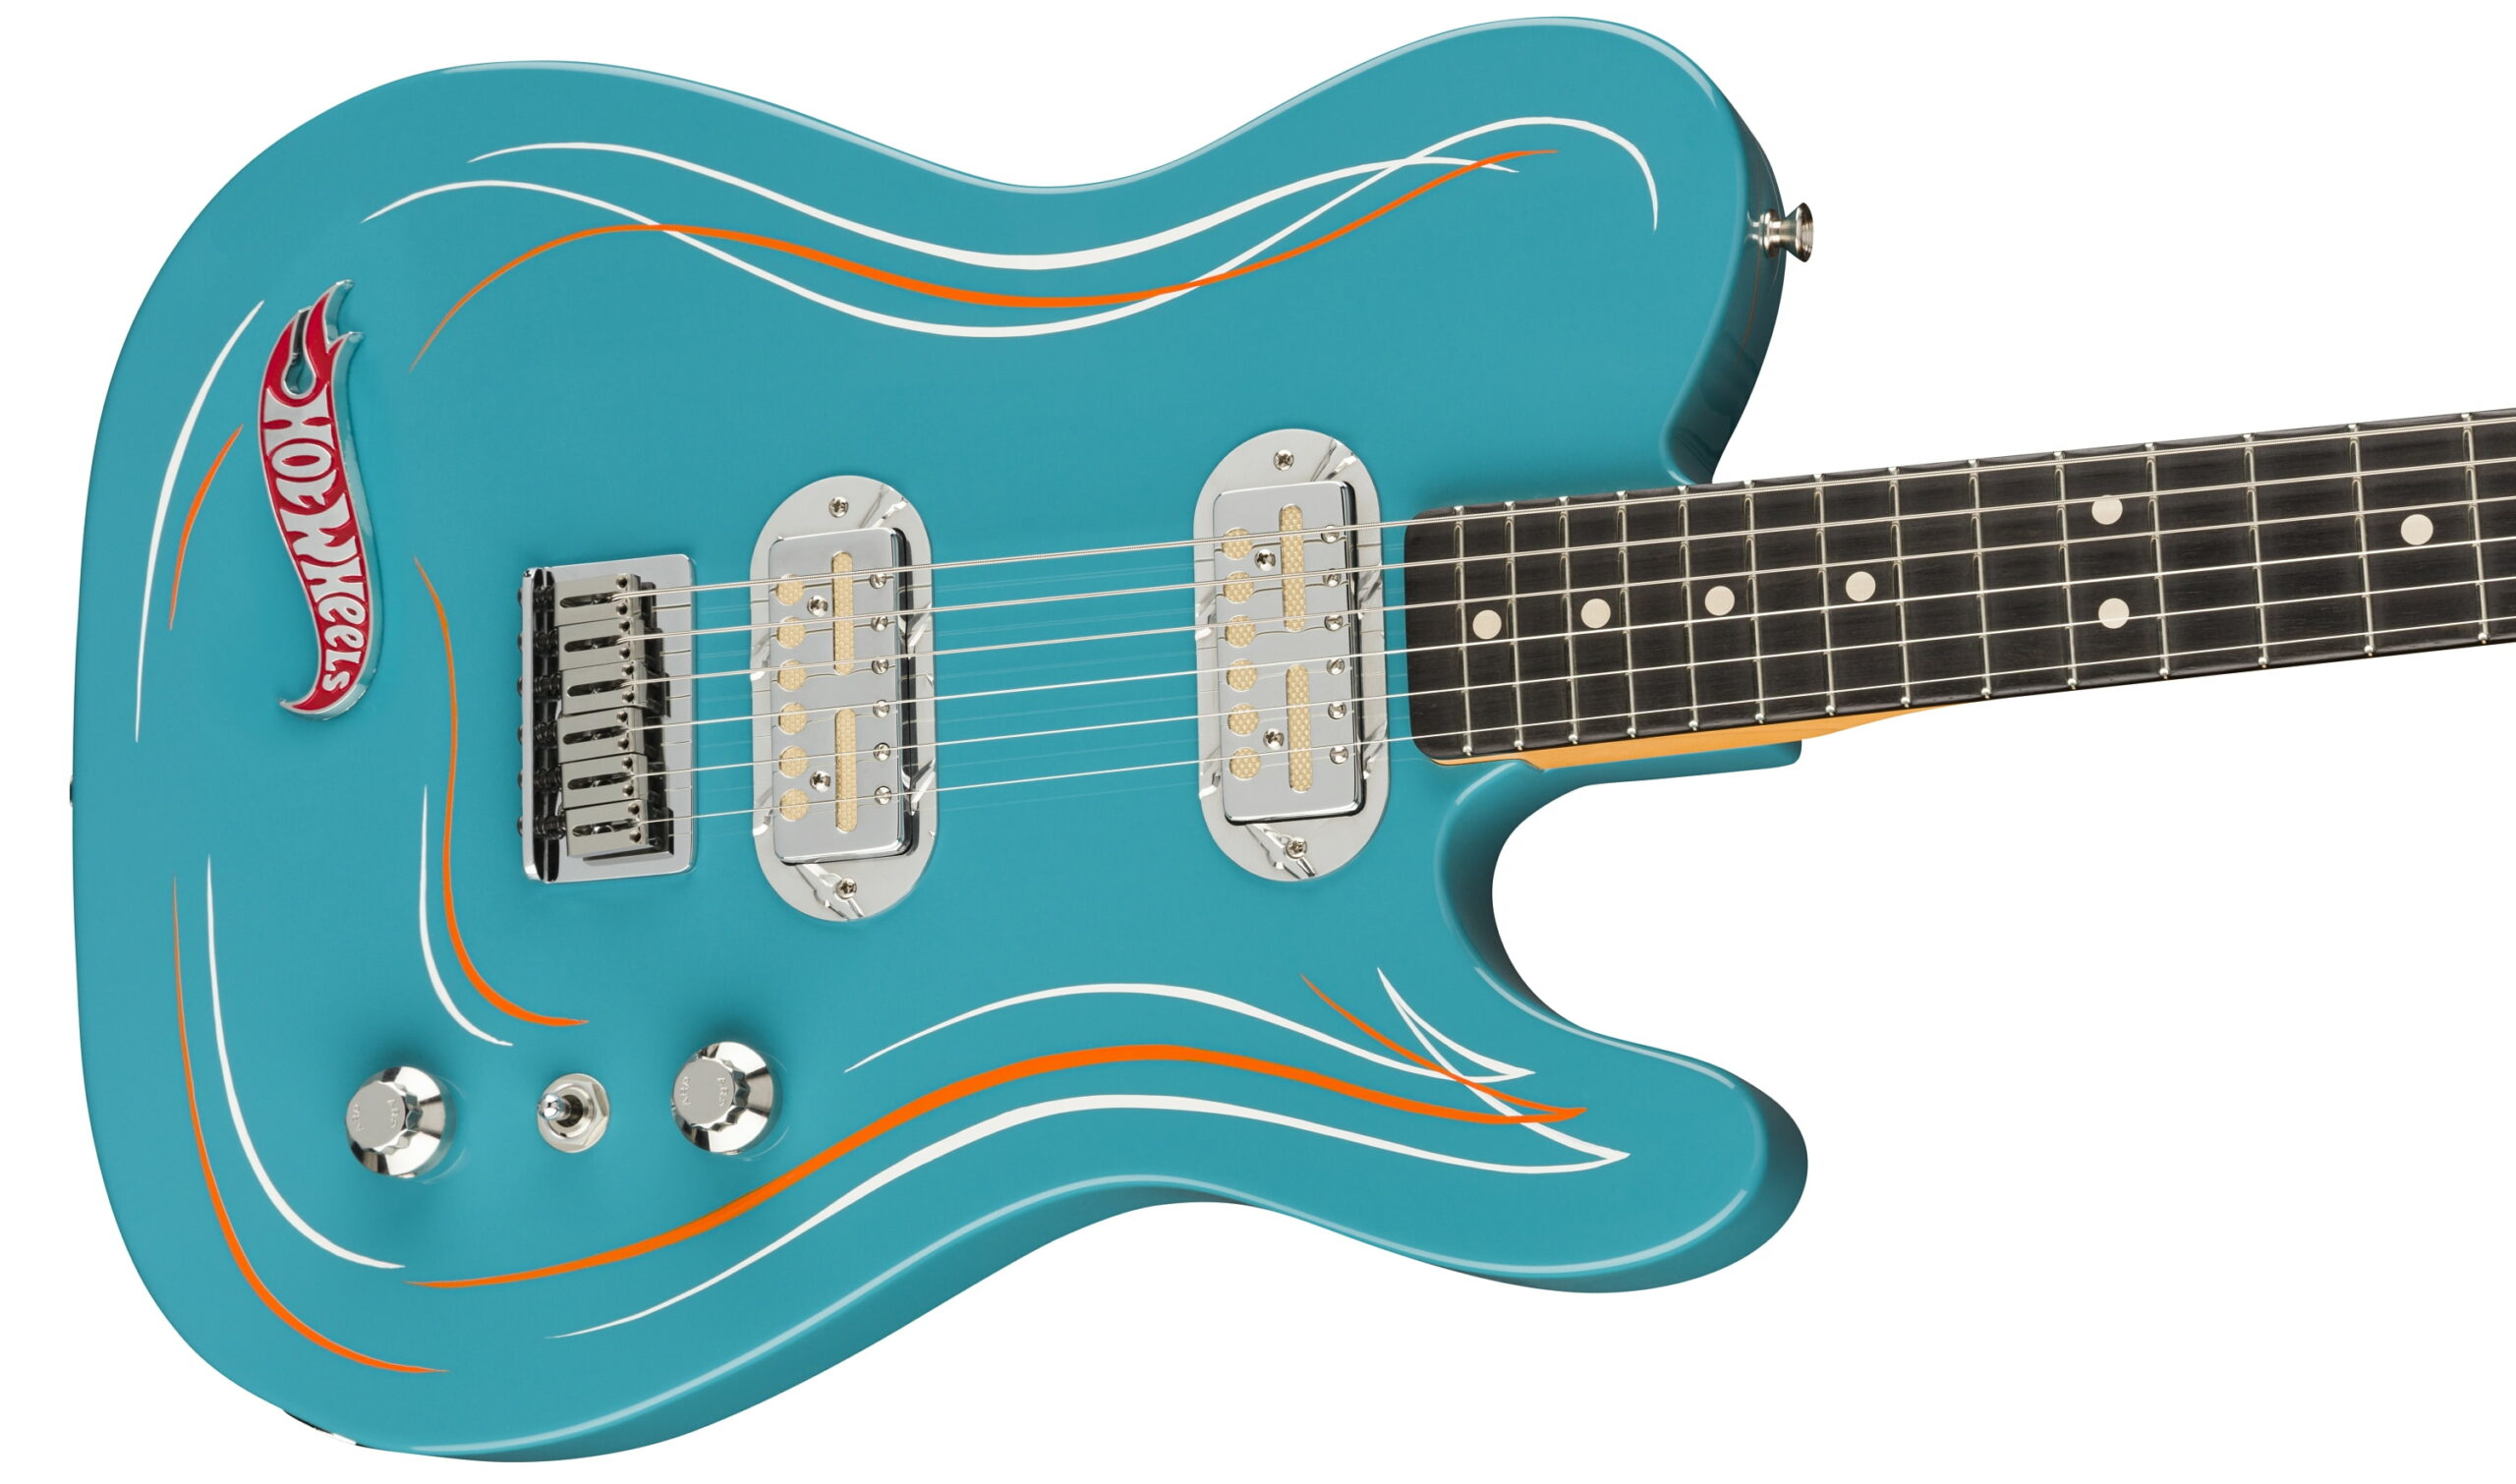 Hot Wheels Fast-Bed Hauler Tele, Taos Turquoise (Masterbuilt by Ron Thorn)